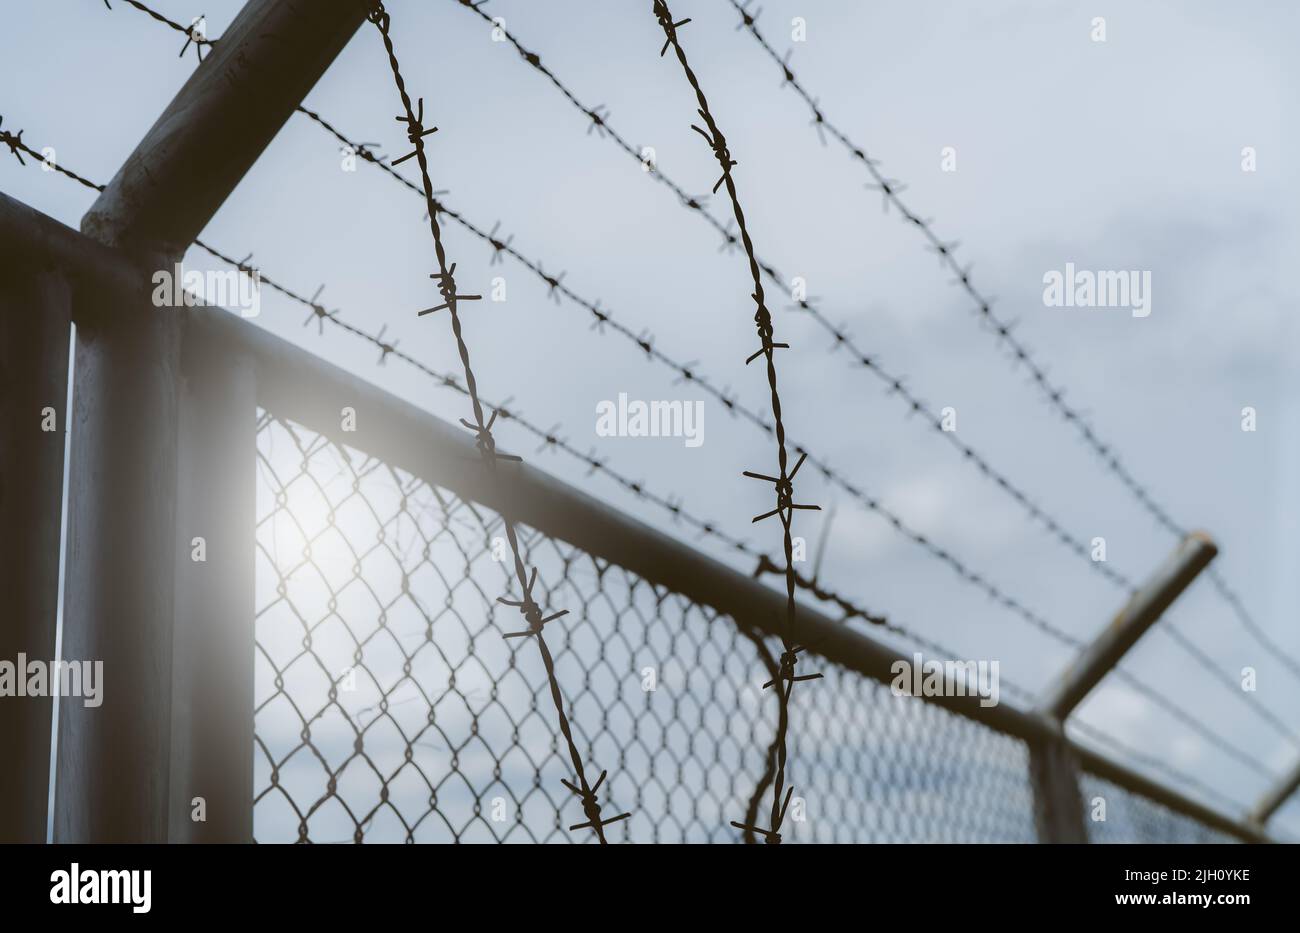 Prison security fence. Border fence. Barbed wire security fence. Razor wire jail fence. Boundary security wall. Prison for arrest of criminals Stock Photo